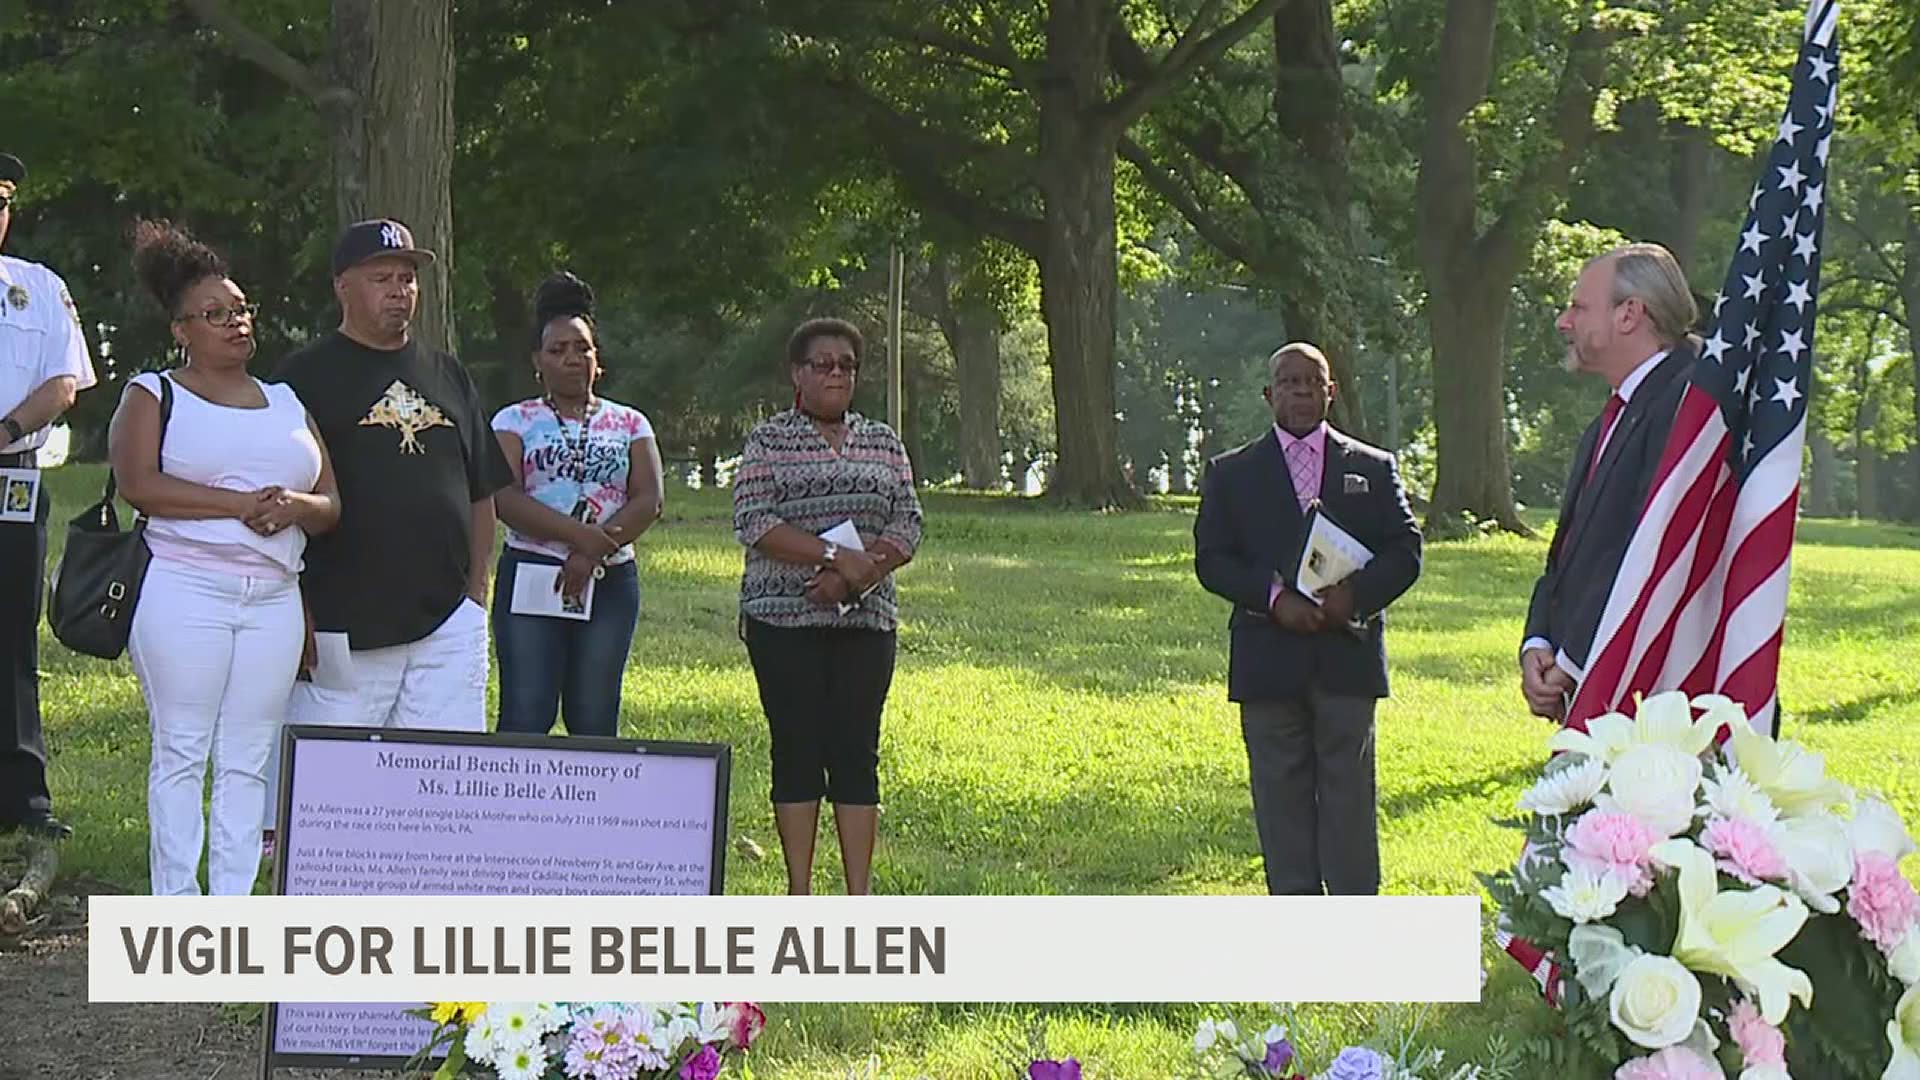 A July 21 prayer vigil honored Lillie Belle Allen, a Black woman who was murdered during the 1969 York Race Riots.